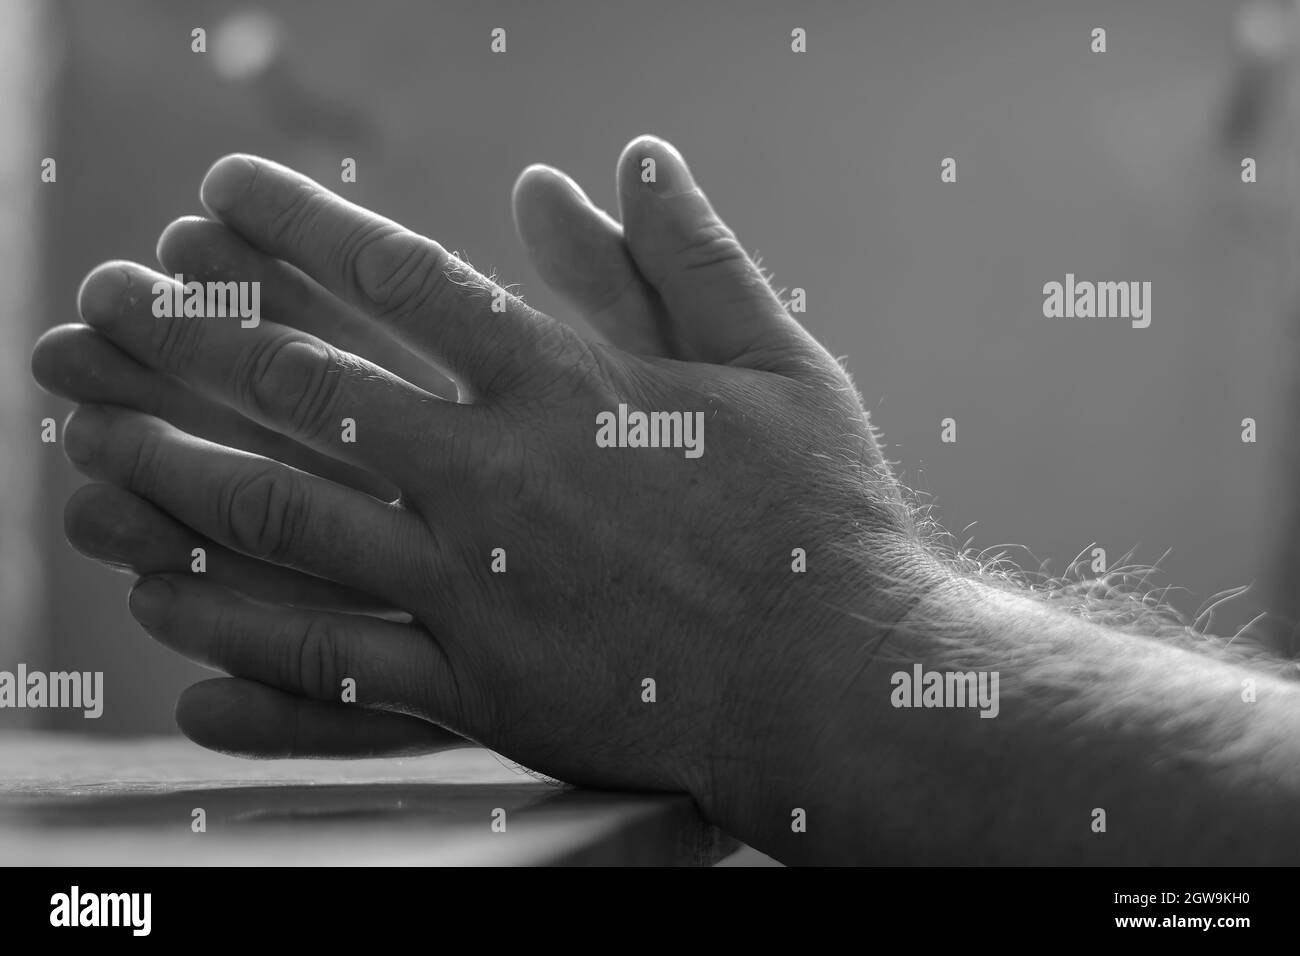 Defocus, blur, noise, grain effect. Close-up of men's hands folded in prayer. Hands of an elderly man lying on the table. Side view. Monochrome. Selec Stock Photo